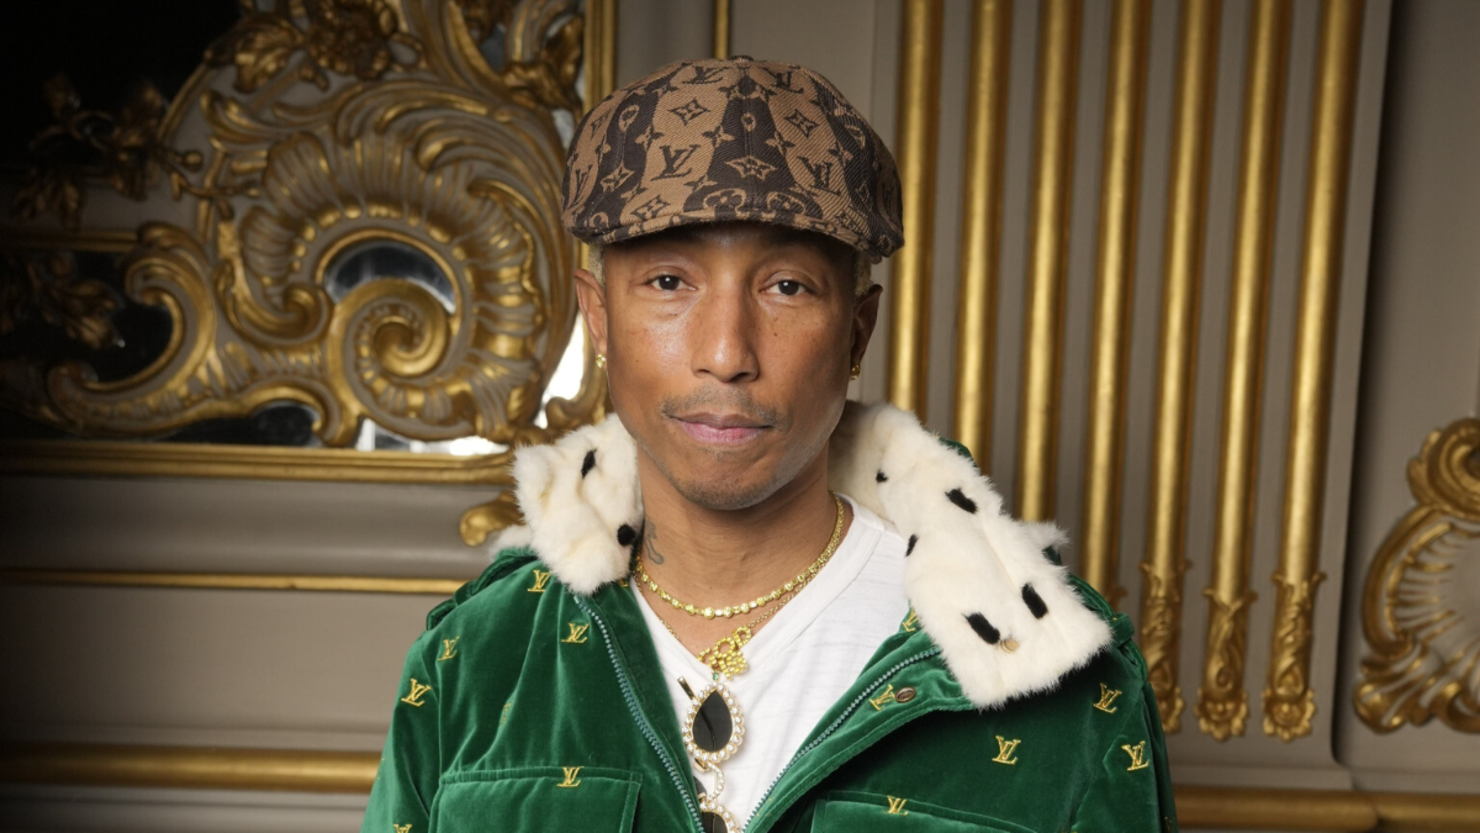 Pharrell Williams presented the first collection for Louis Vuitton in Paris